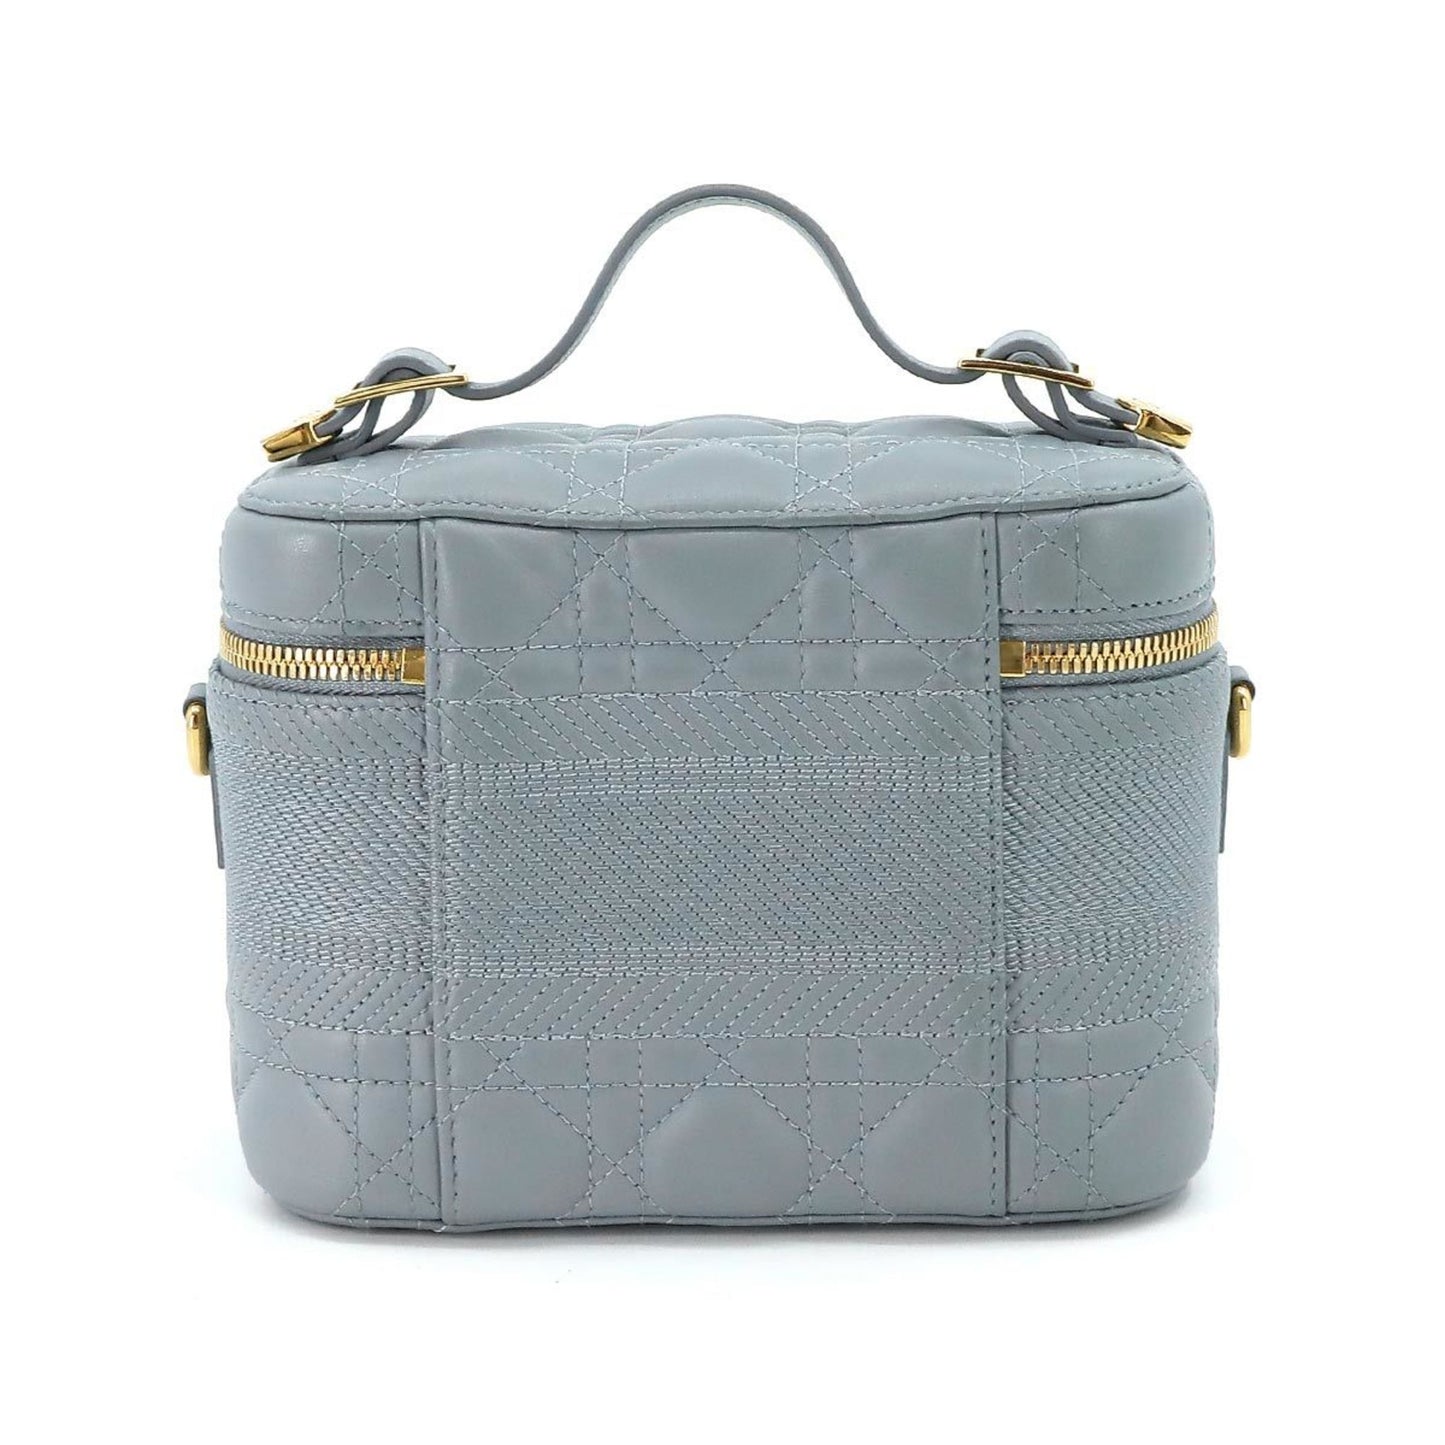 Dior Women's Luxurious Blue Leather Vanity Bag by Christian Dior in Blue